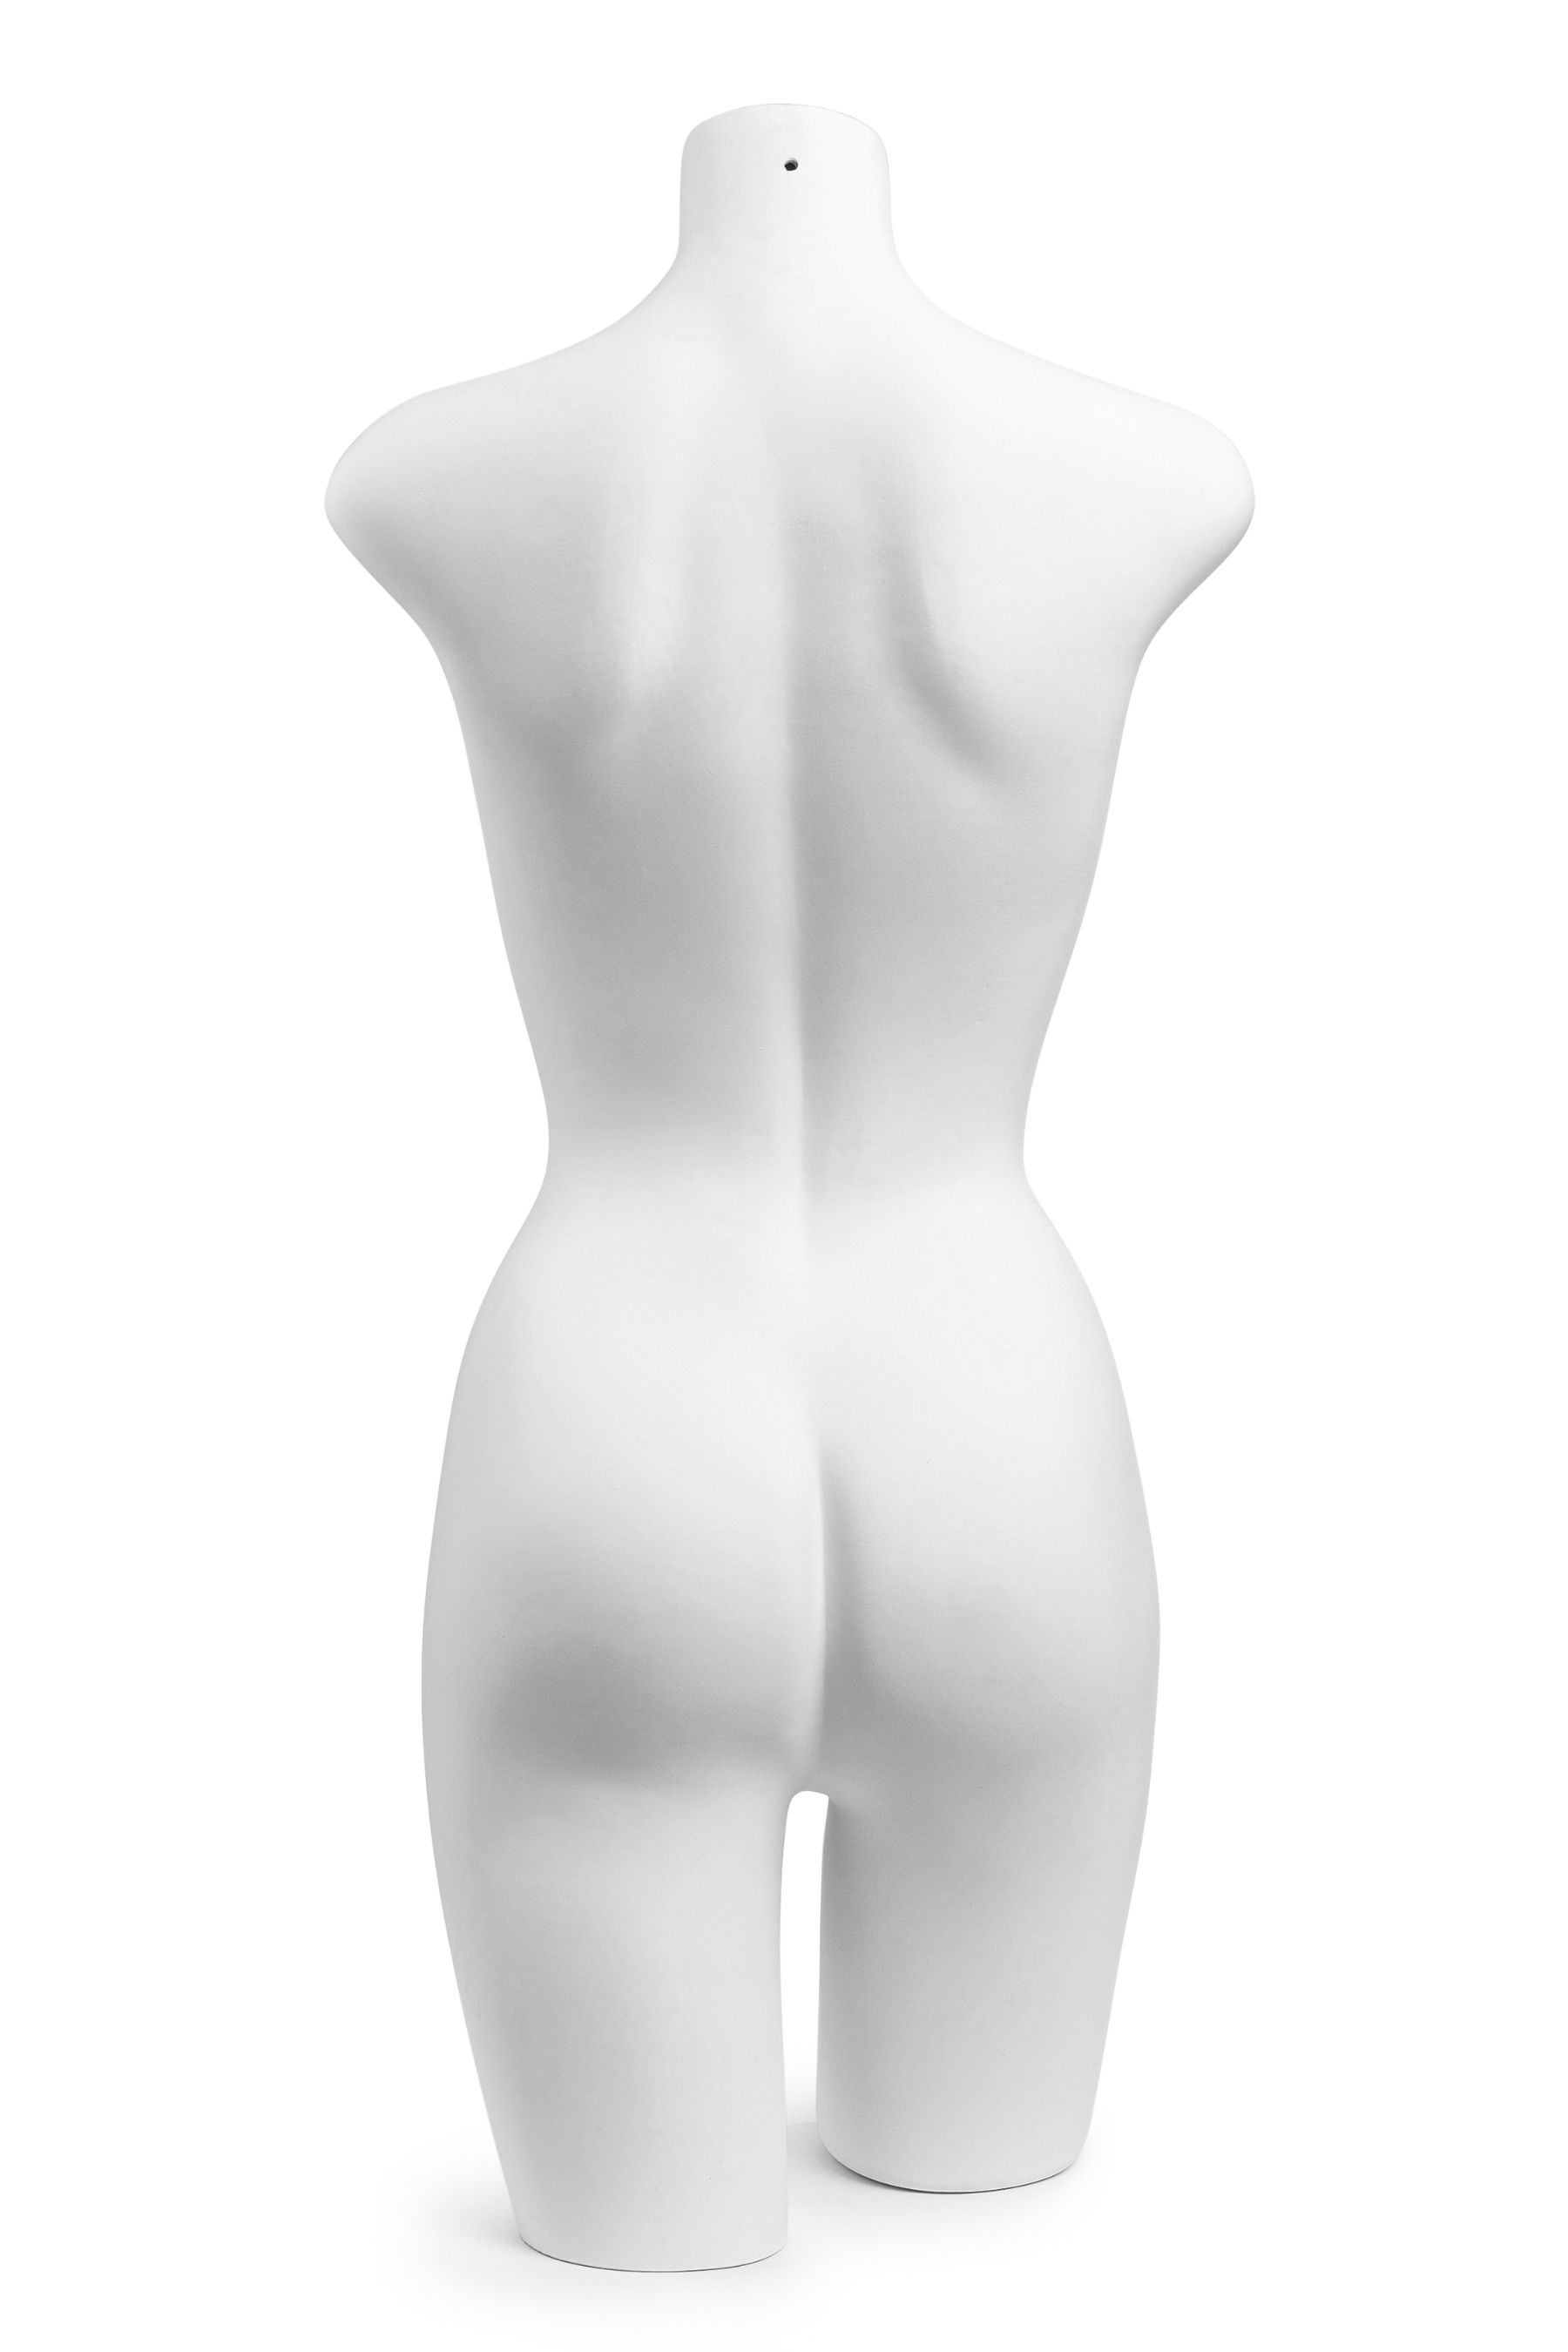 Female 3/4 Body Mannequin, White Color | The Shop Company